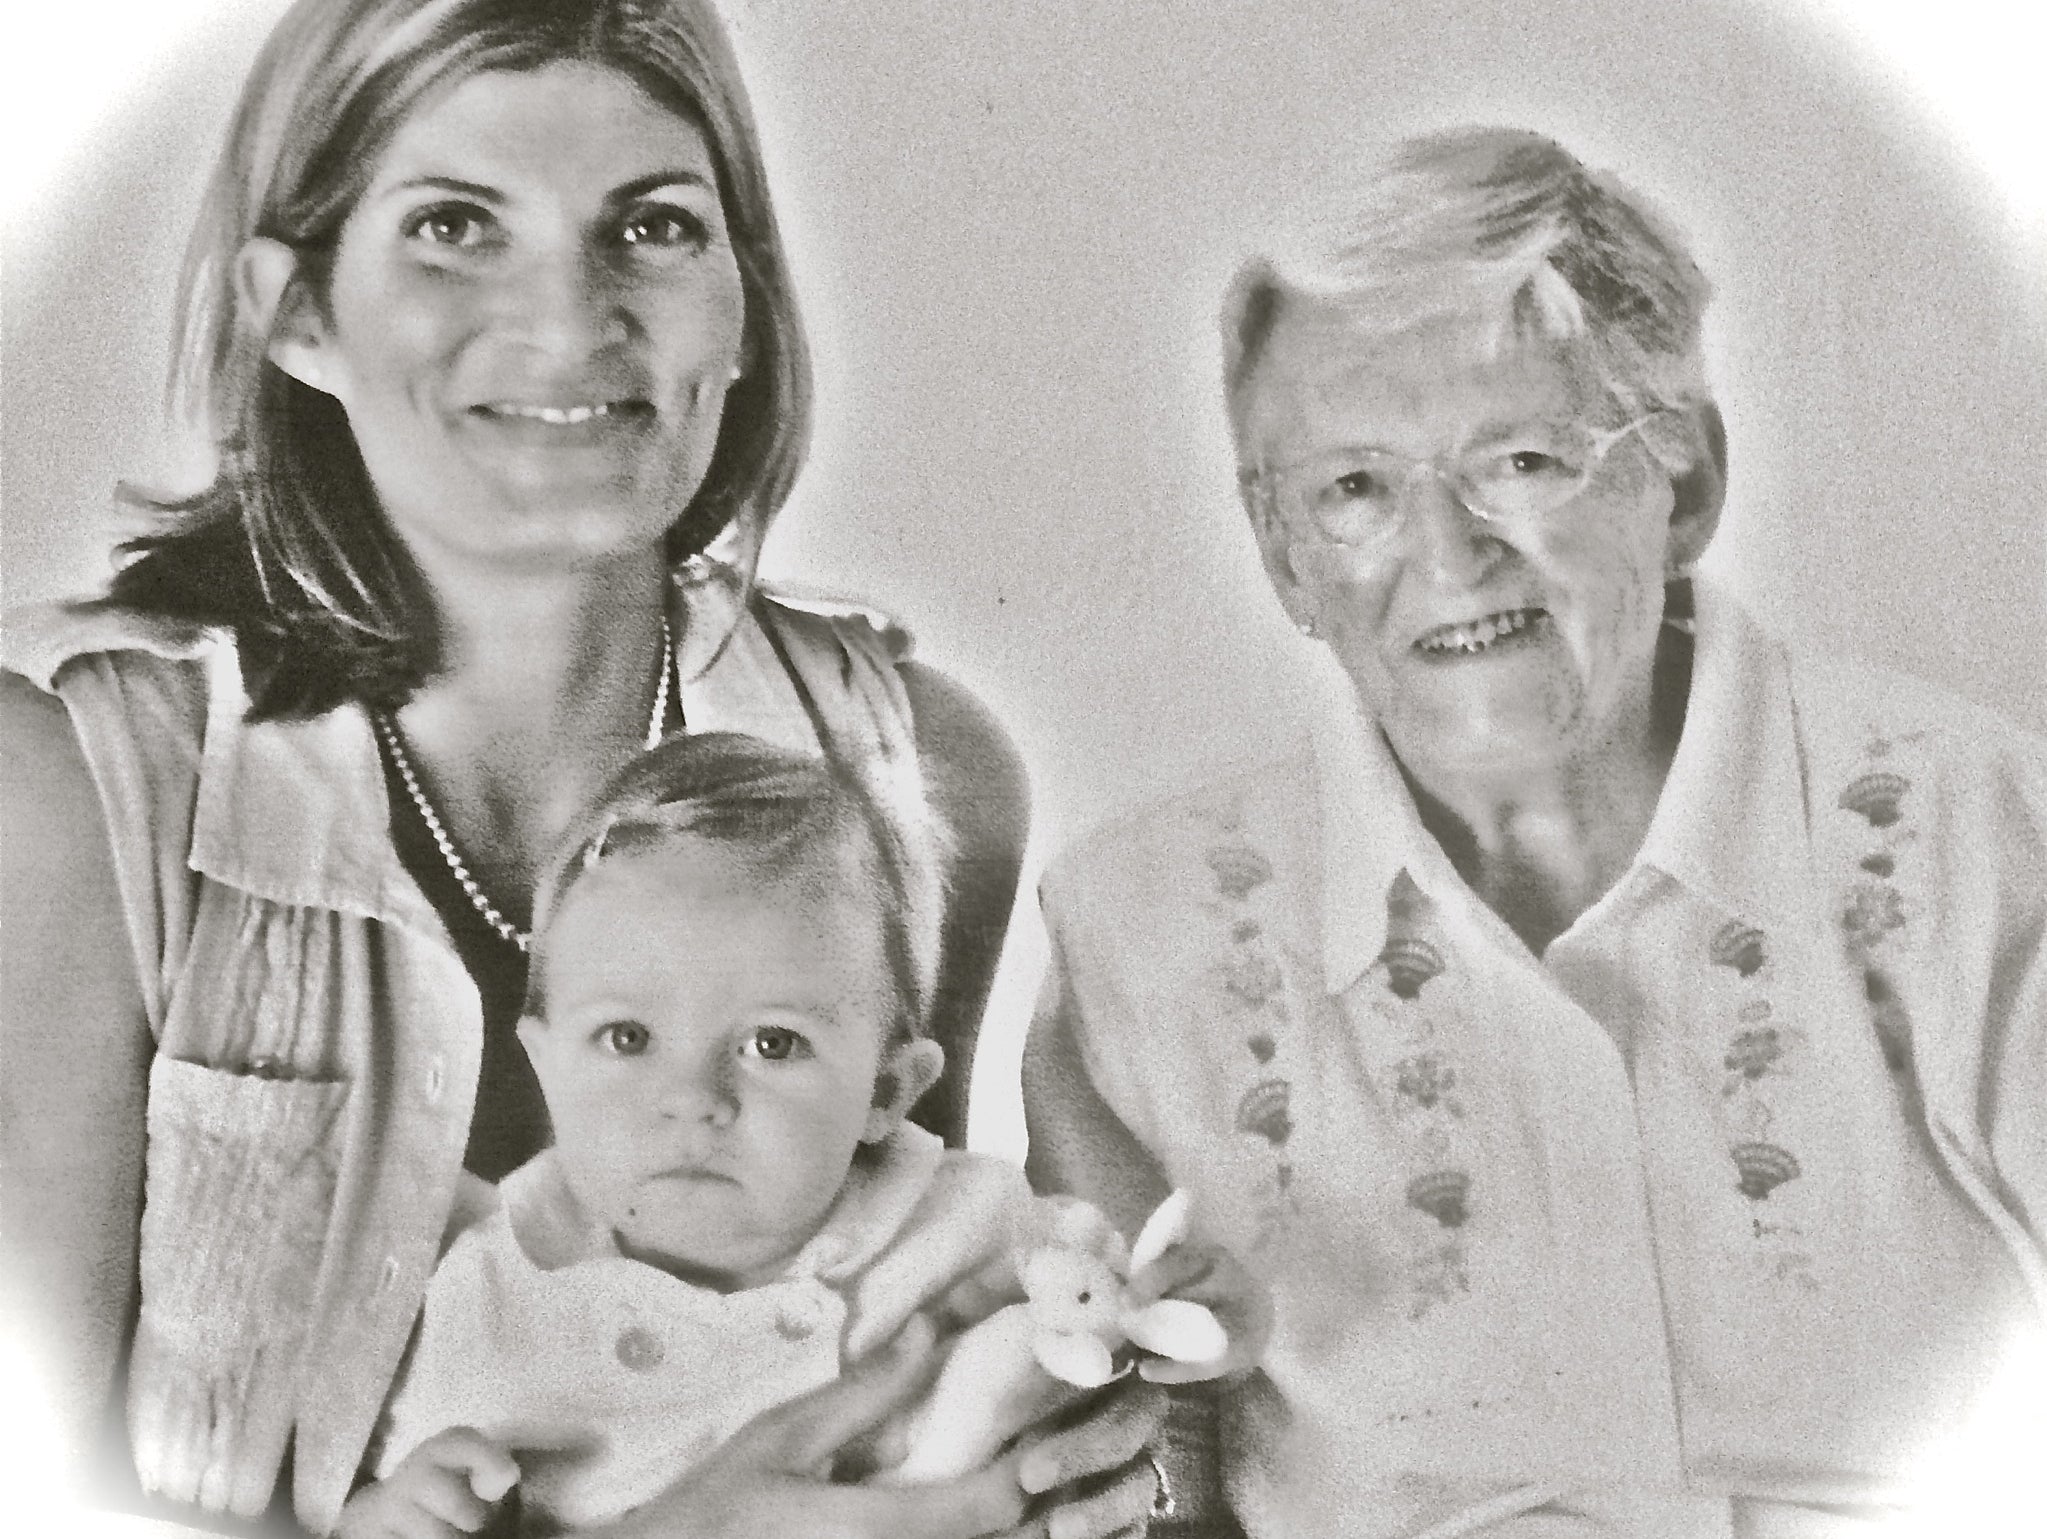 My grandmother, my daughter and me. September 2005.